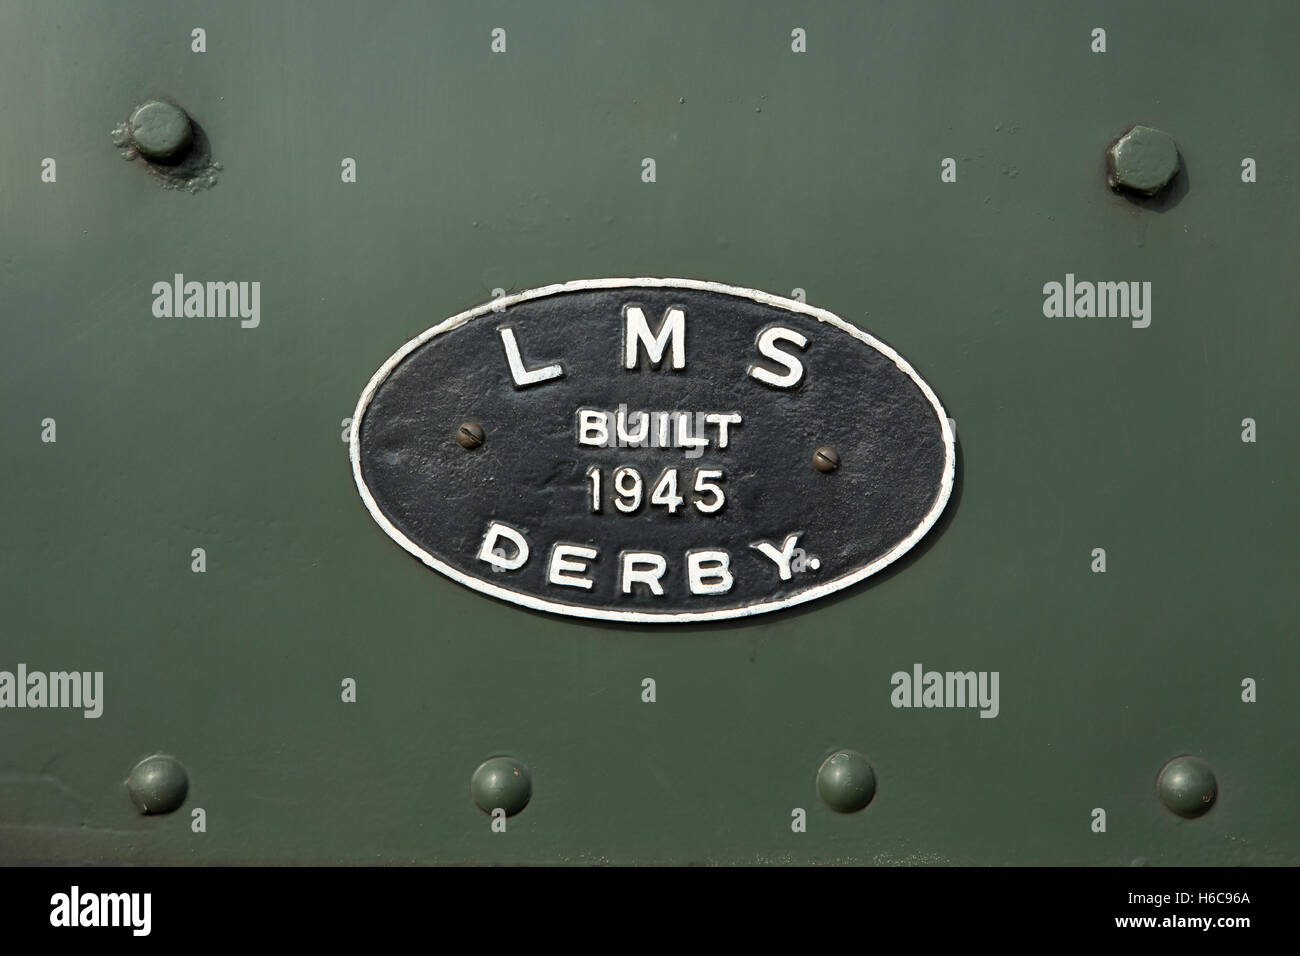 LMS Steam Engine plaque engraved with built 1945 DERBY. Green London Midland Scotland train. Stock Photo